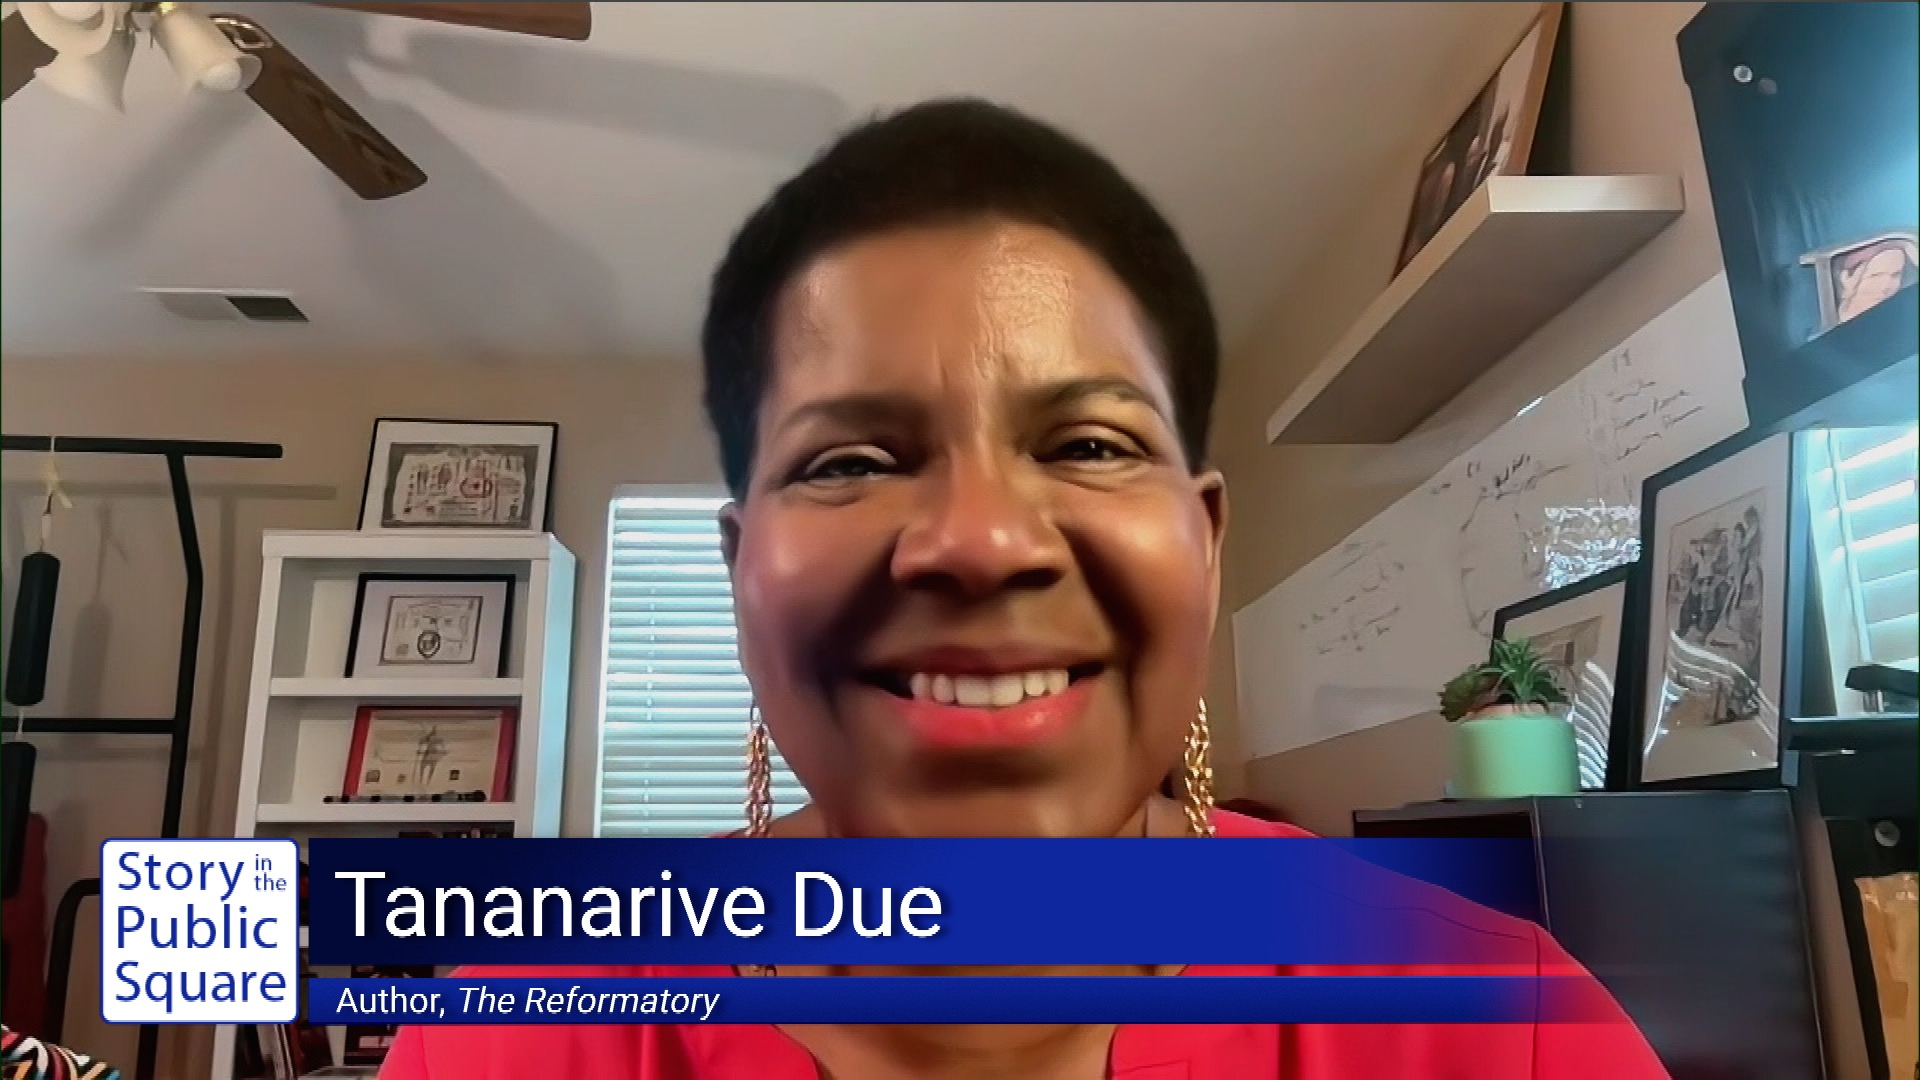 Unraveling the Violence of Jim Crow South with Tananarive Due